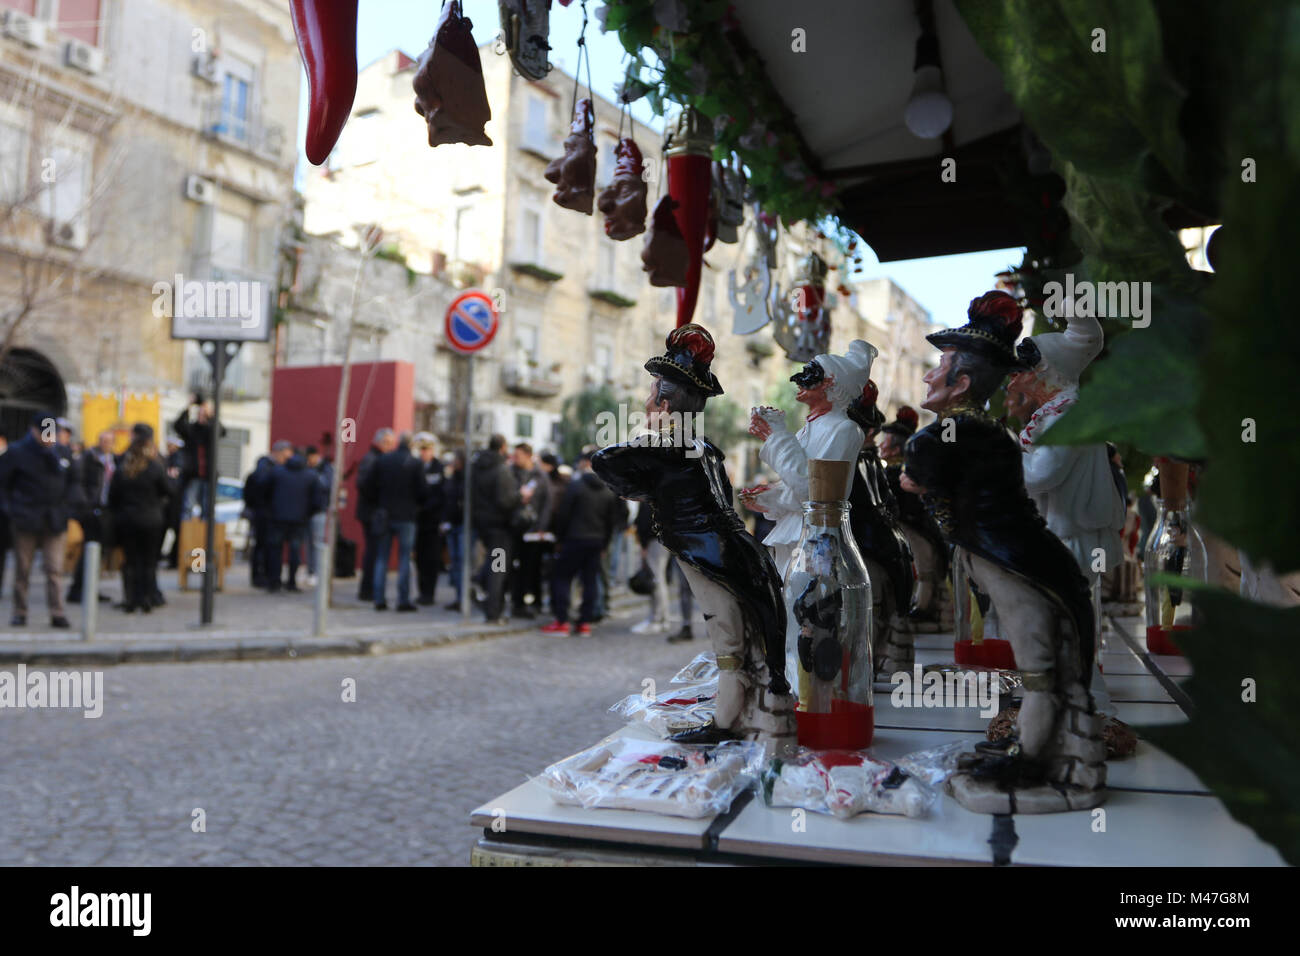 February 15, 2018 - One of the typical stalls that are found in Naples with the statues reproduced by the actor TotÃ². This morning, in the heart of the SanitÃ  district, Largo TotÃ² opens in the square dedicated to Antonio De Curtis to celebrate the 120th anniversary of his birth. In the presence of the mayor of Naples, Luigi De Magistris, the culture councilor Nino Daniele and the president of the council of the third municipality, a plaque entitled to the prince of laughter was discovered among the applause. Also the nephews of TotÃ² were present. who celebrated his memory with a moving par Stock Photo